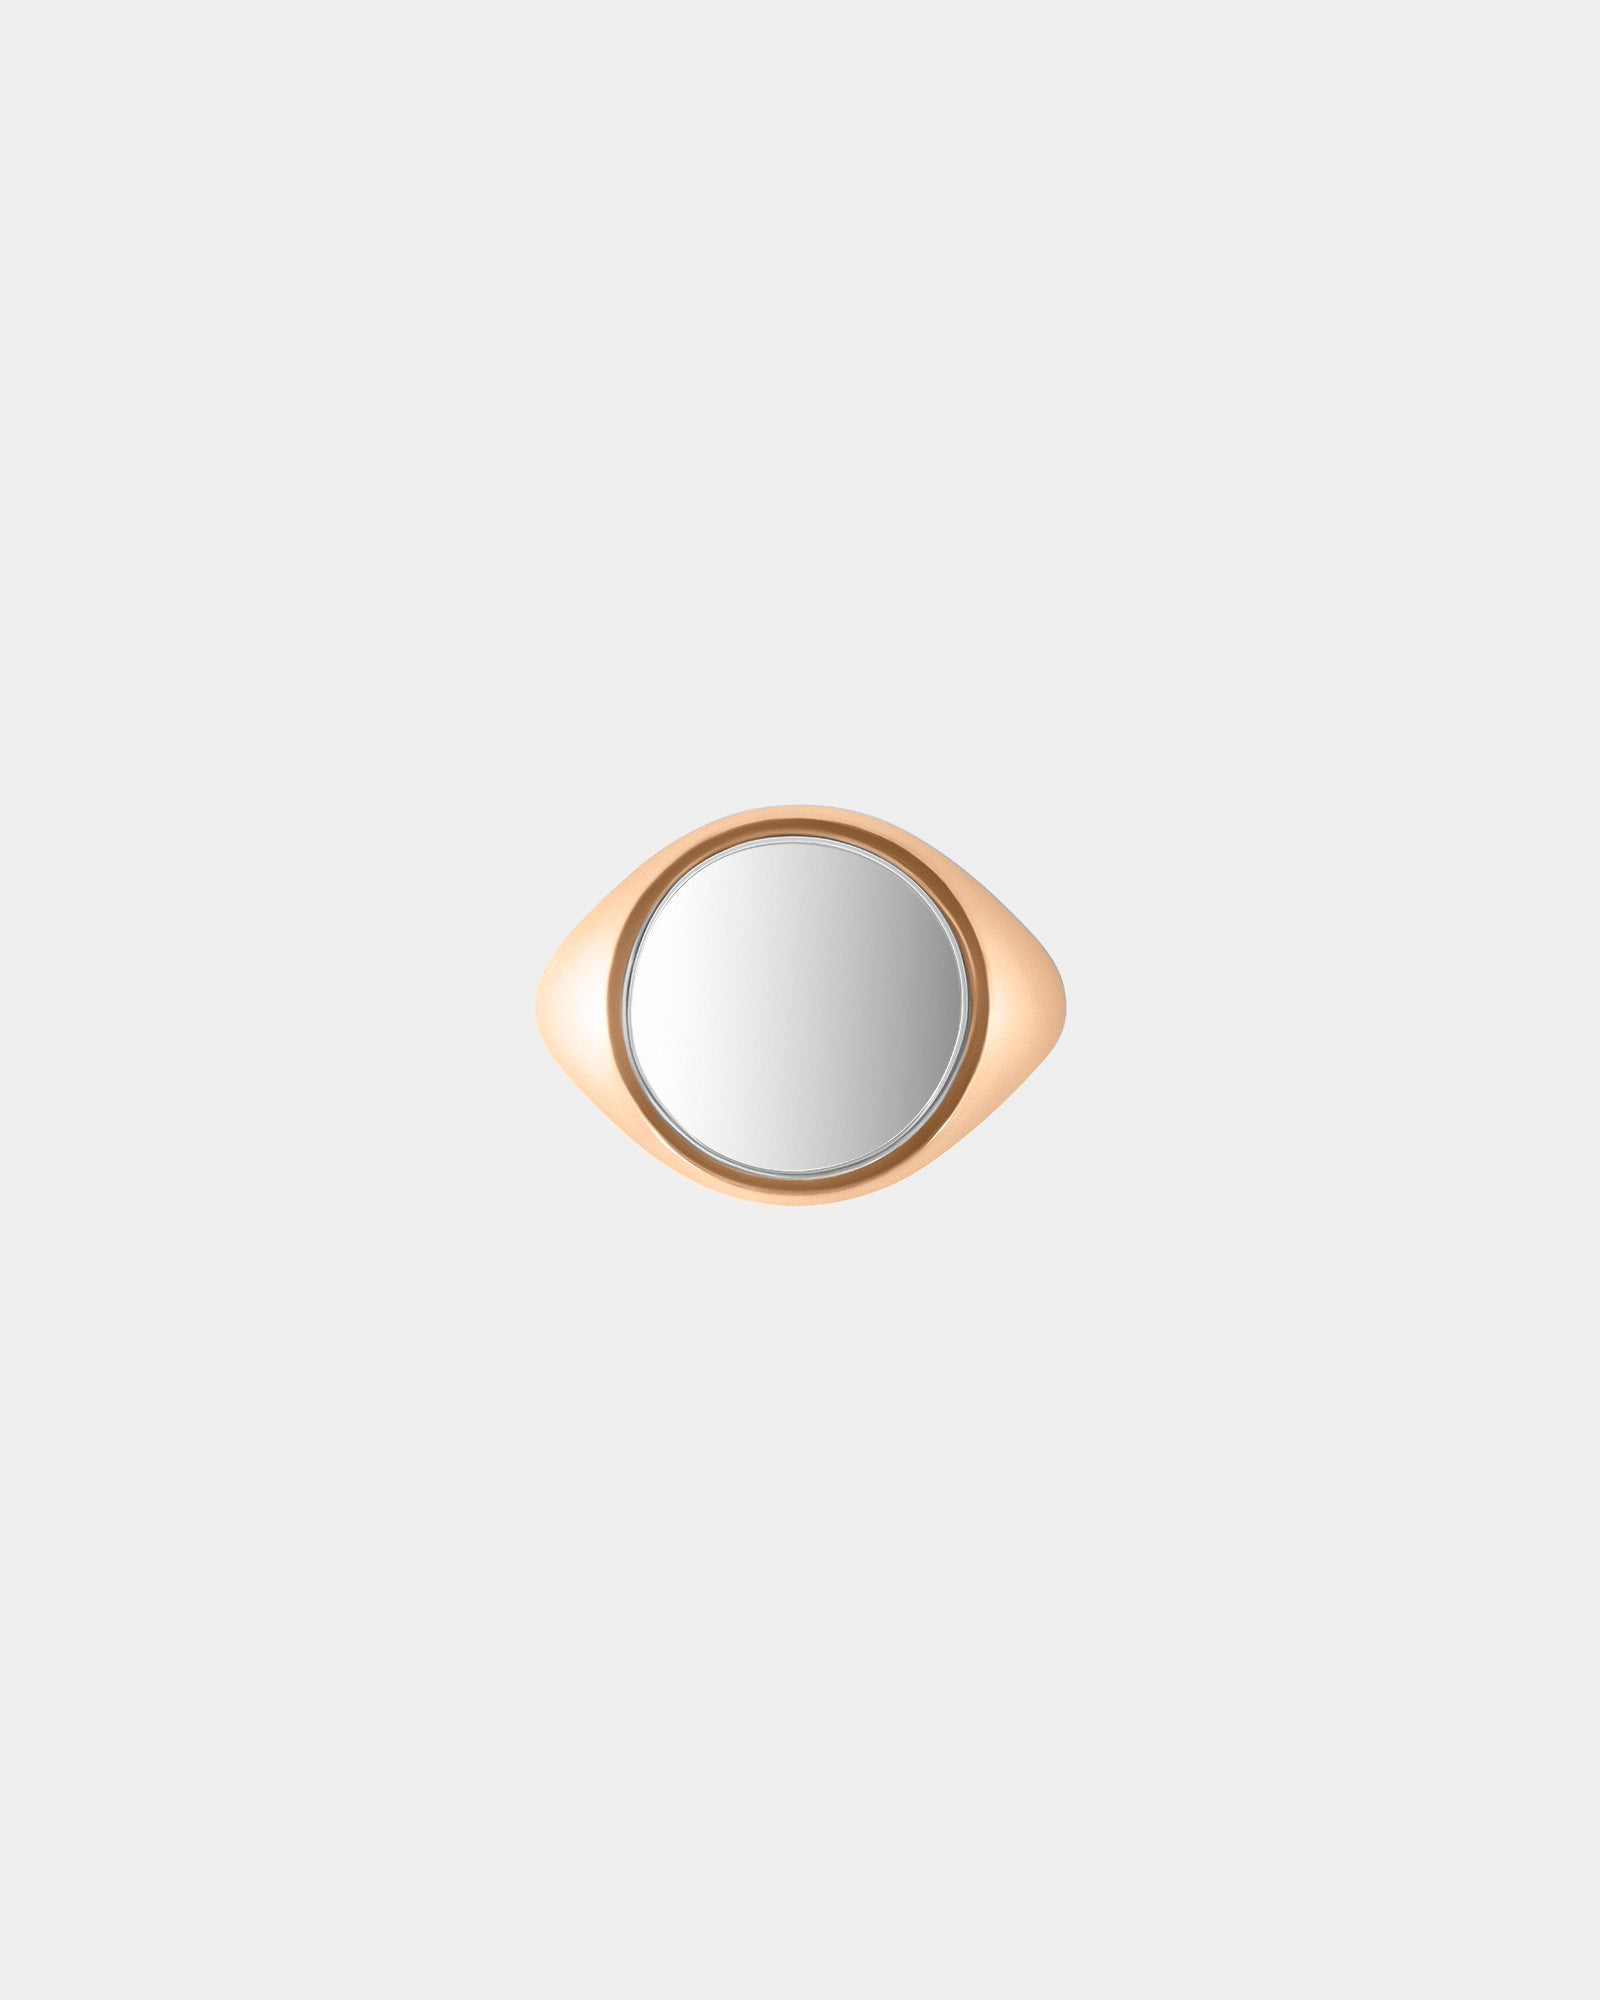 Large Round Signet Ring in 9k Rose Gold / Sterling Silver by Wilson Grant